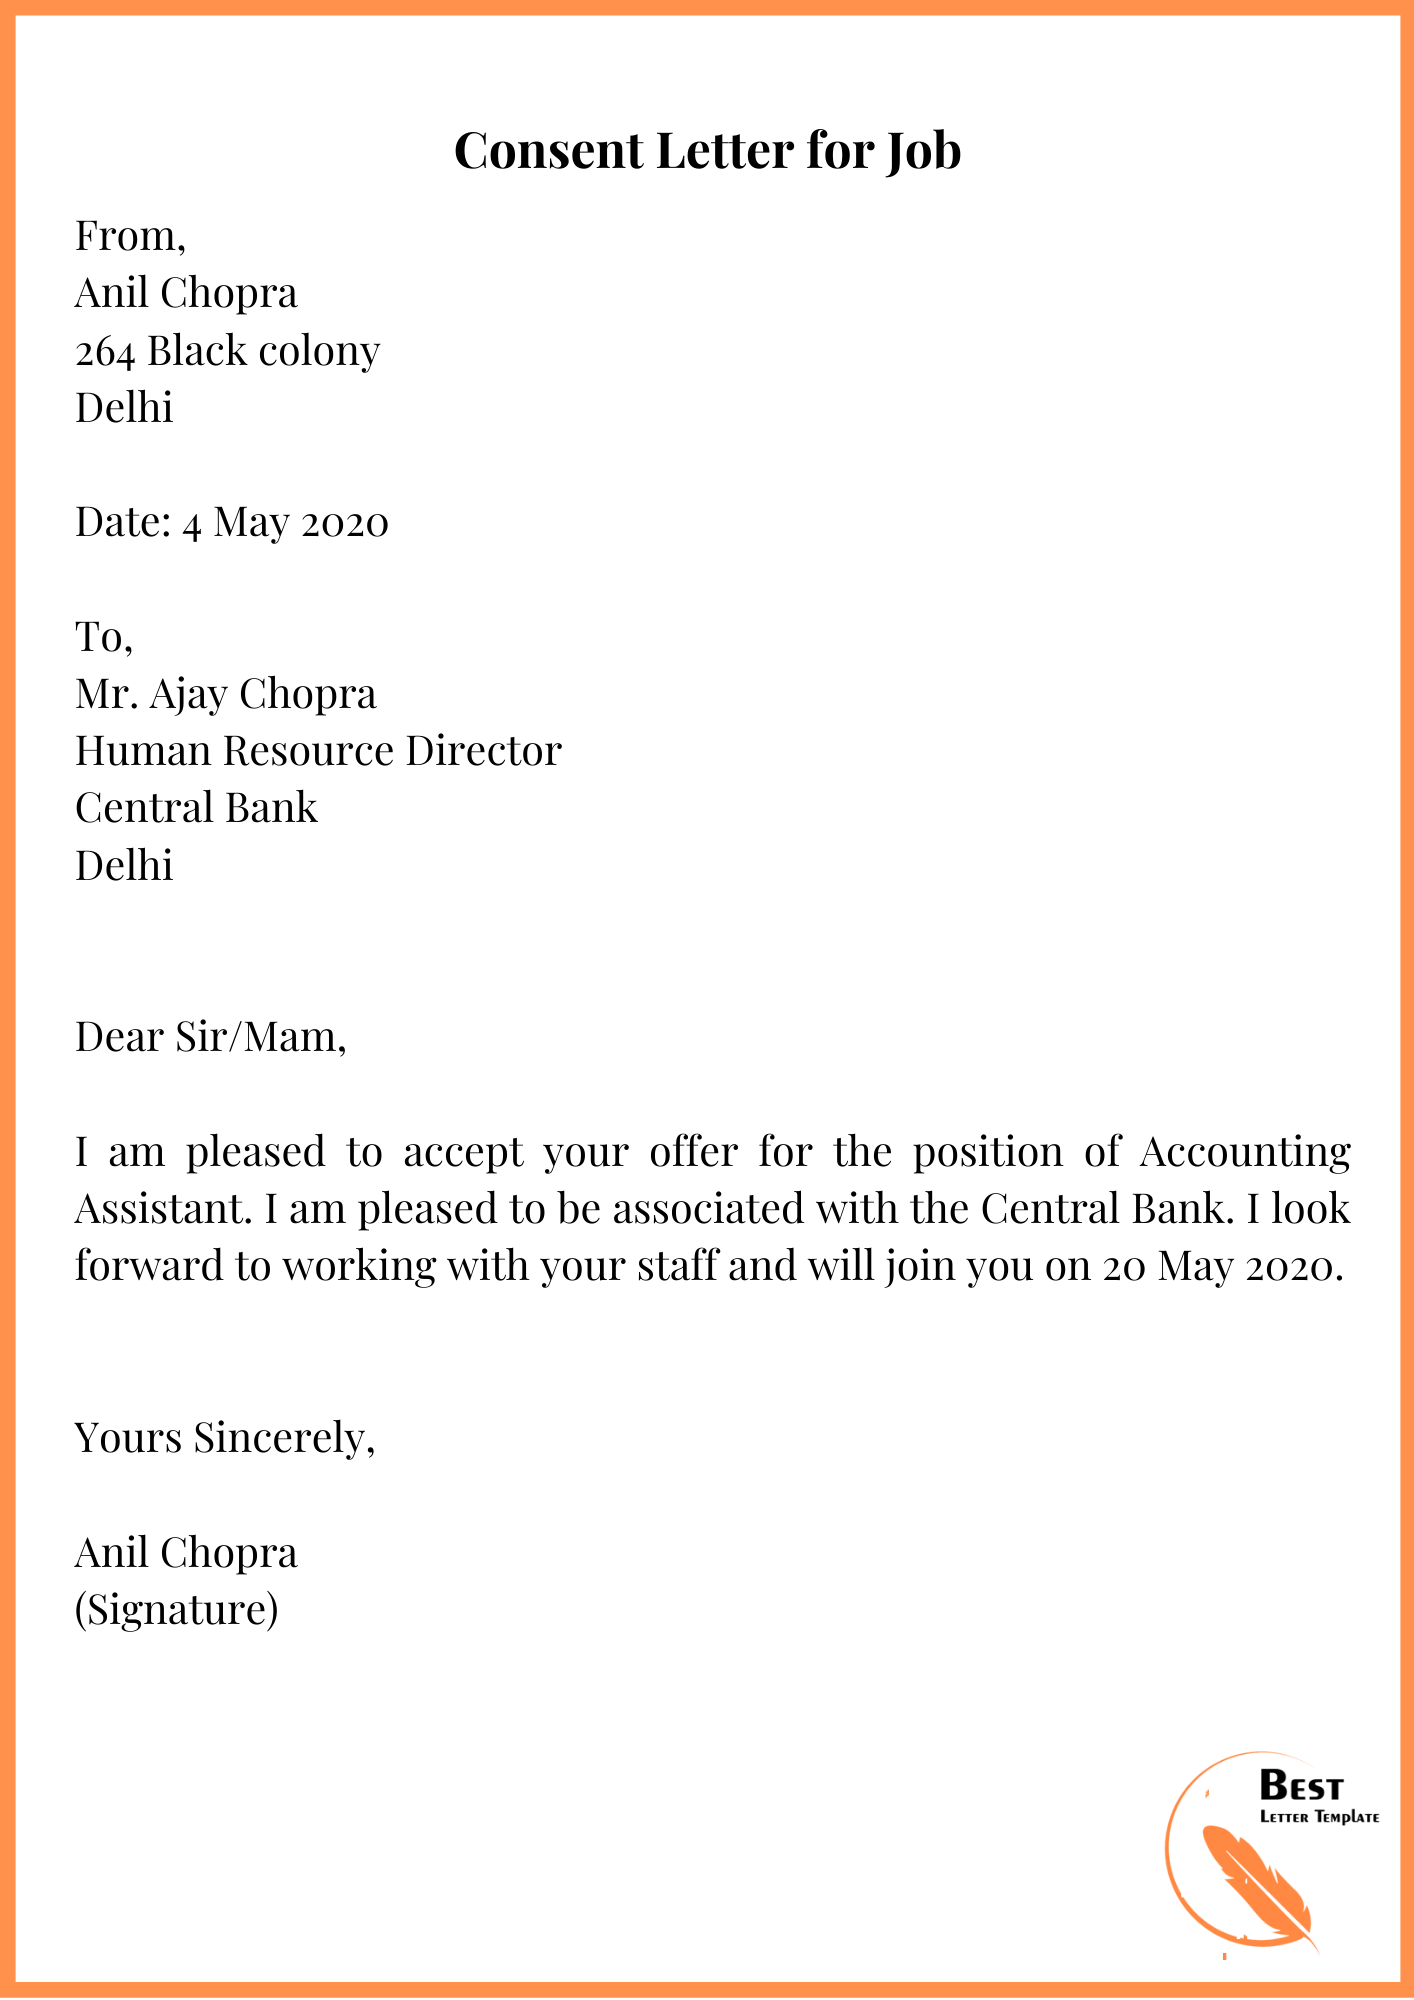 Consent Letter Template Format, Sample, and Examples